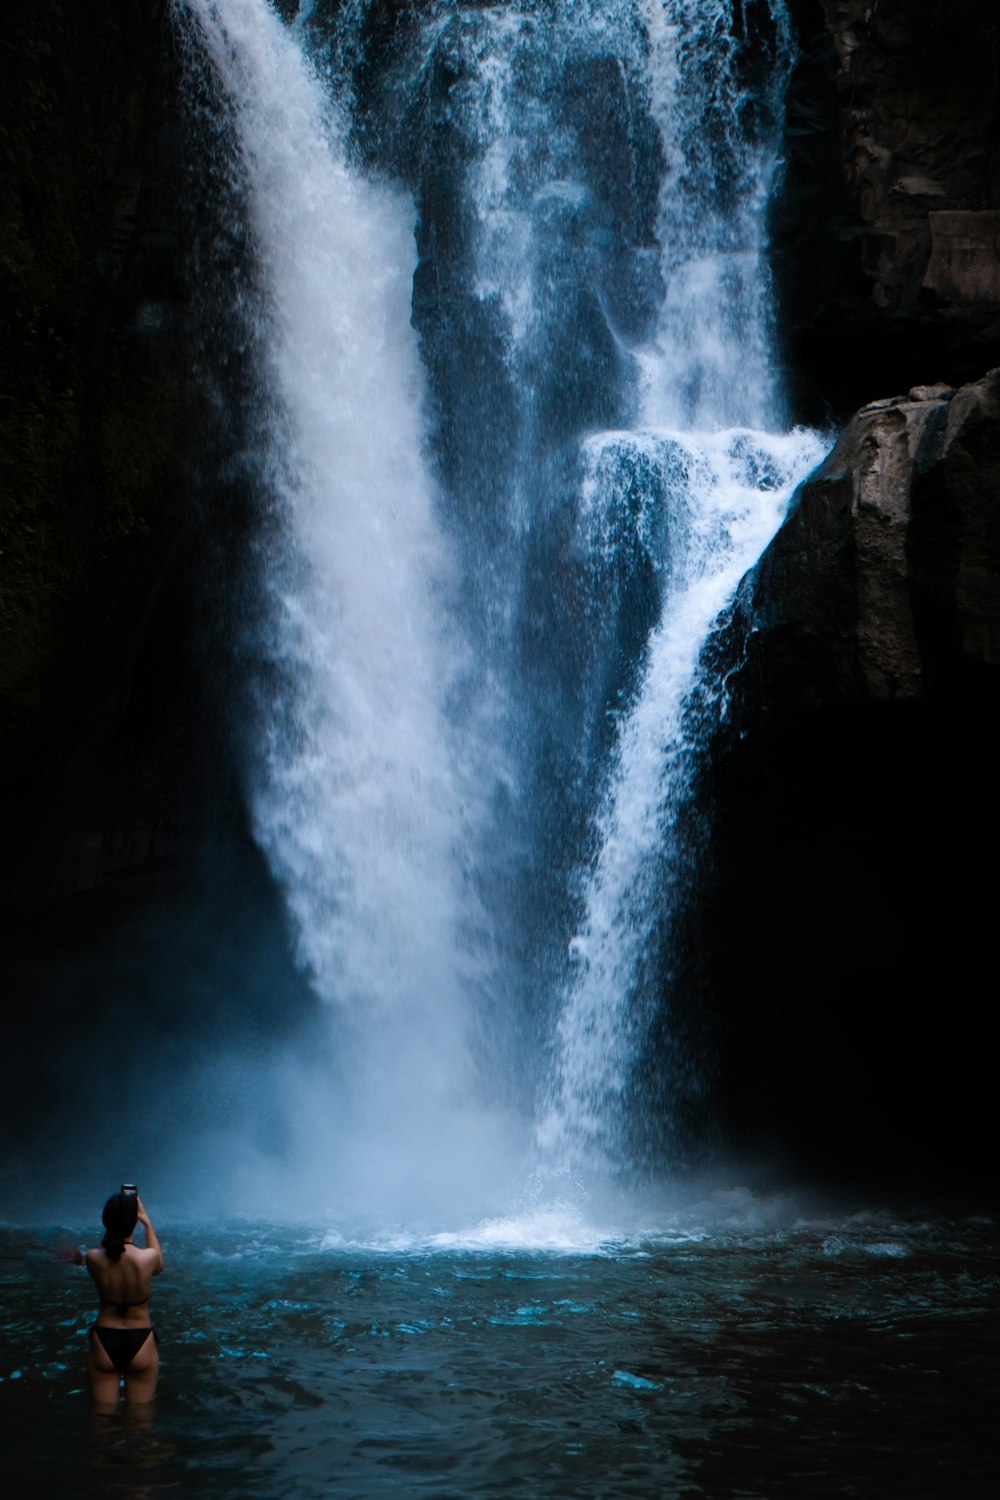 a person standing in a body of water near a waterfall